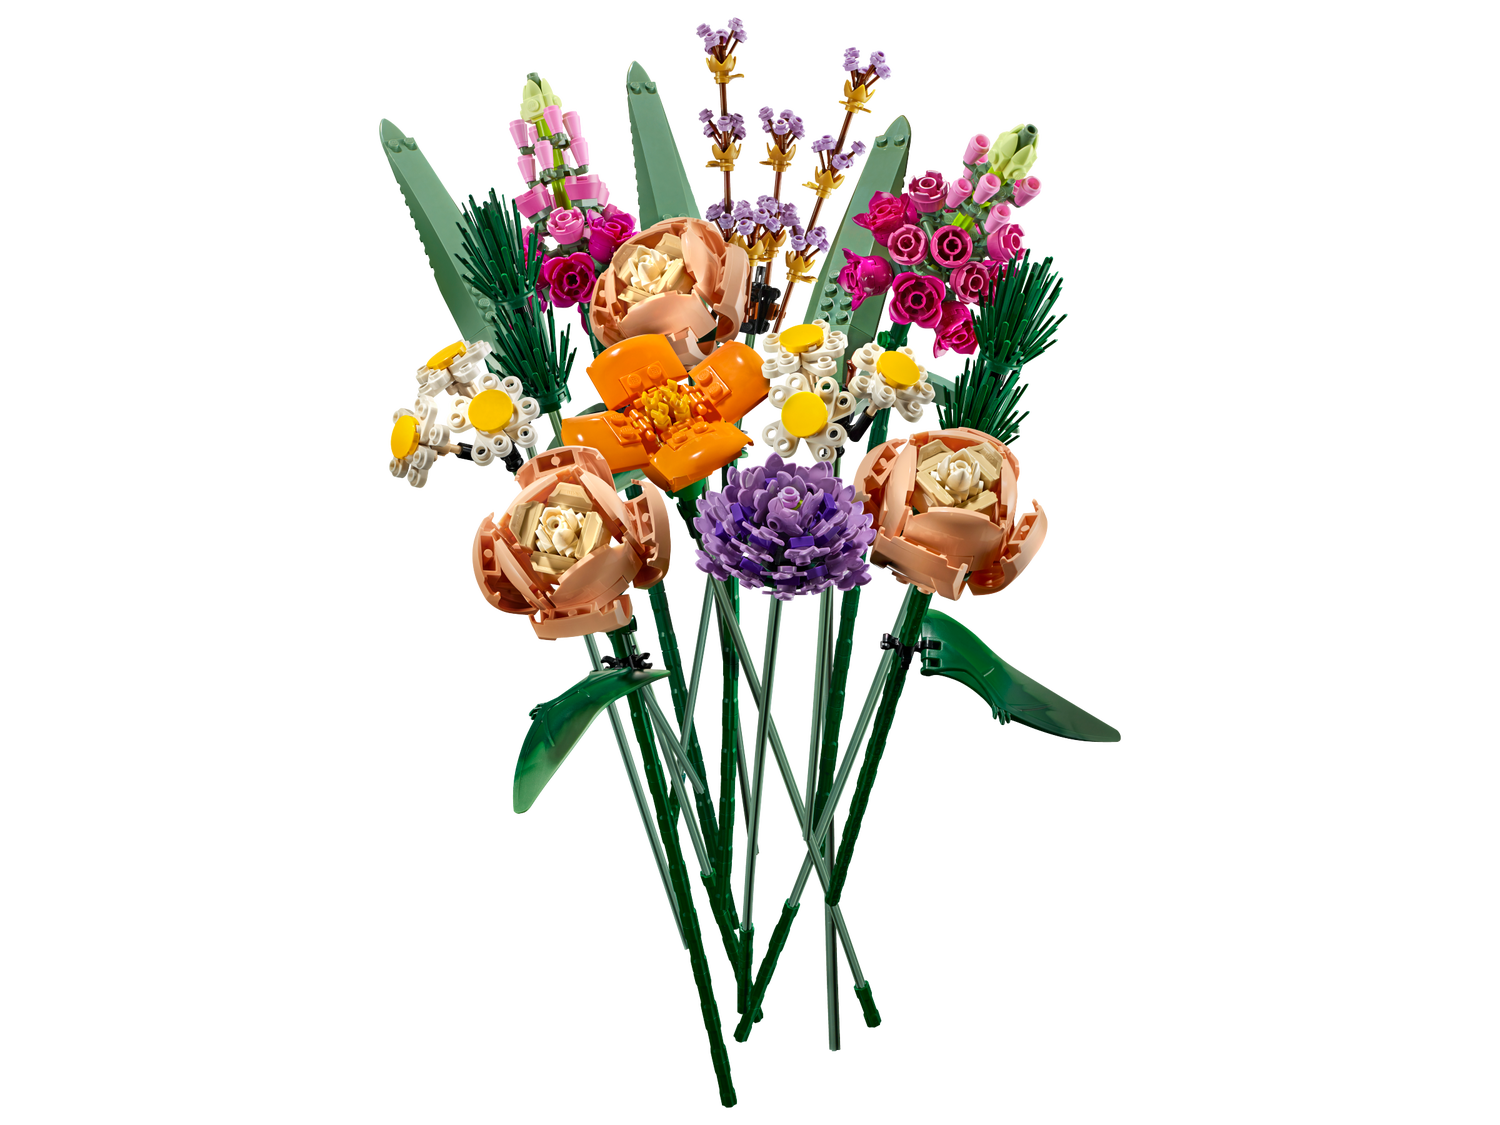 Flower Bouquet 10280 | The Botanical Collection - LEGO